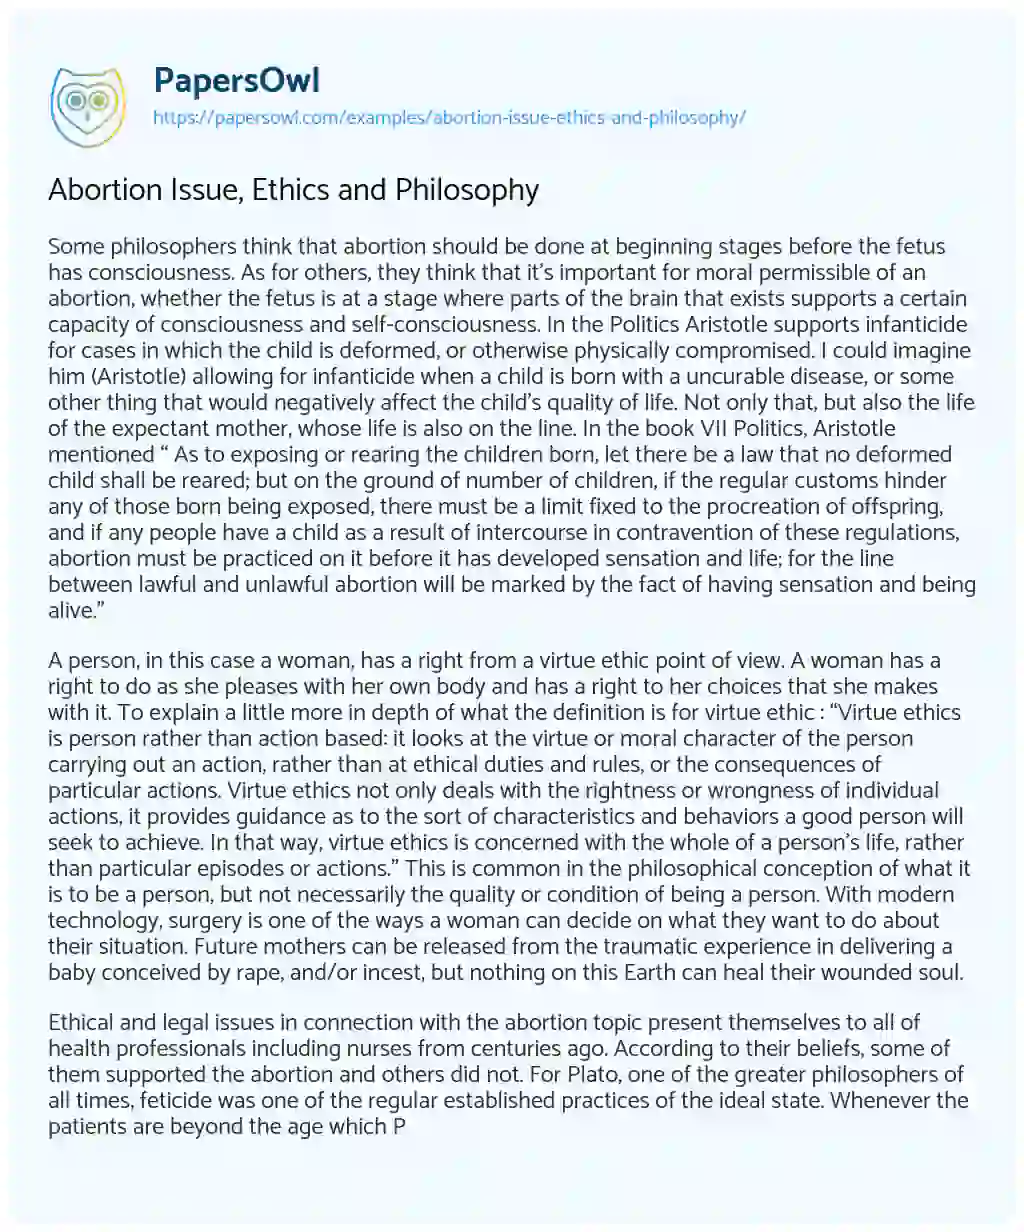 Essay on Abortion Issue, Ethics and Philosophy